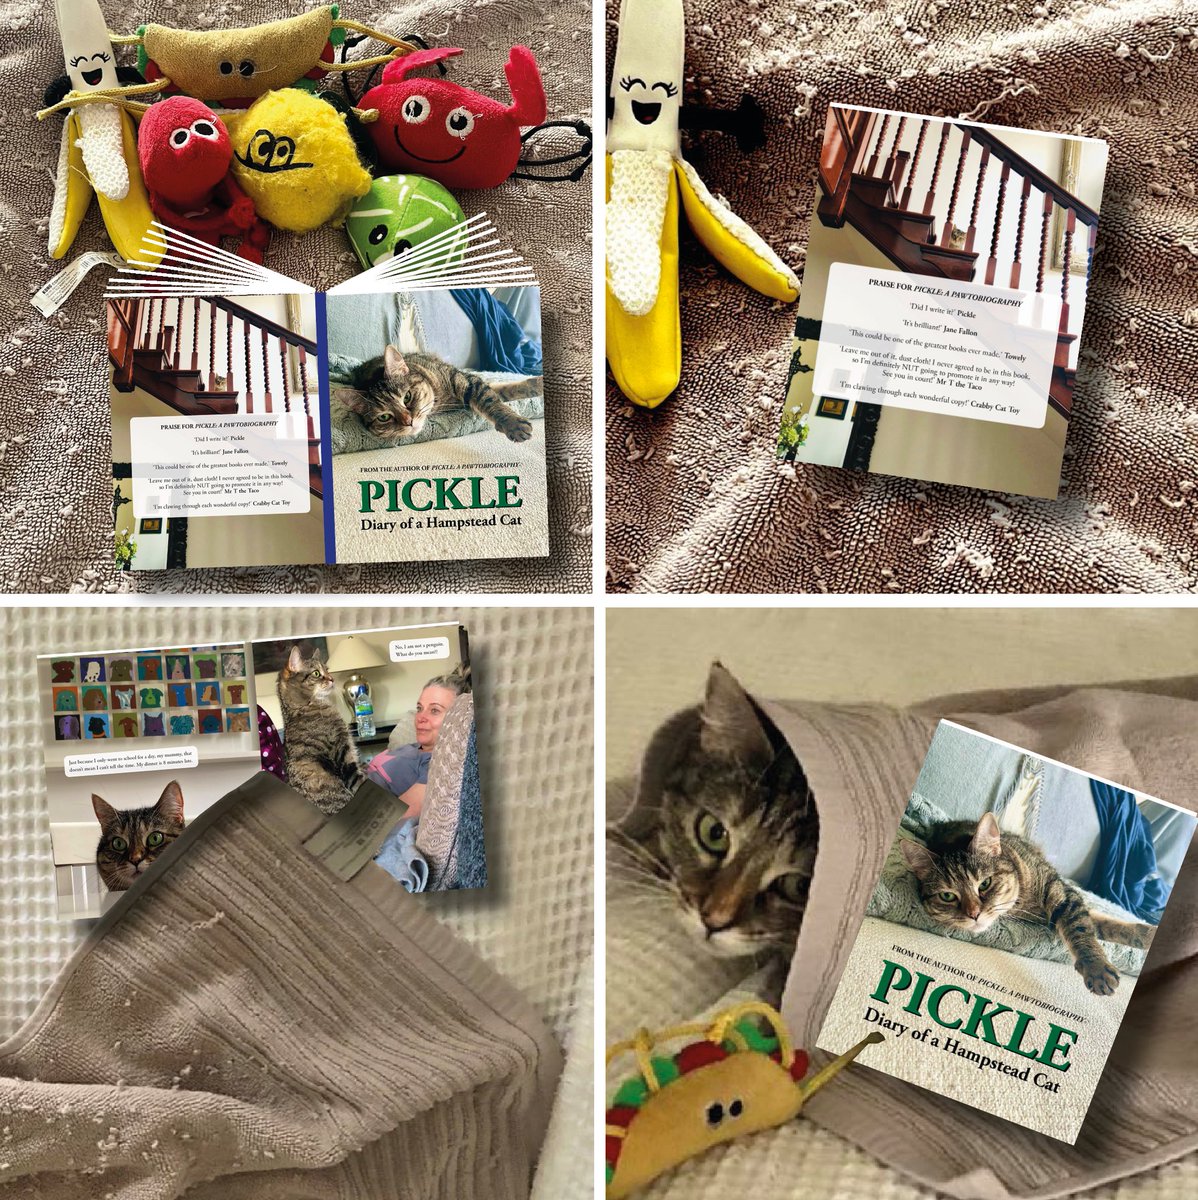 Question for @TowelyTowel: when you read your favourite book, does @PickliciousF put it face down on top of you, or do you drape yourself over it? #PickleDiary 
To order, DM @GonzotheCat1 or email gonzothecat2012@gmail.com. All profits to @FelineFriendsUK & @AllDogsMatter